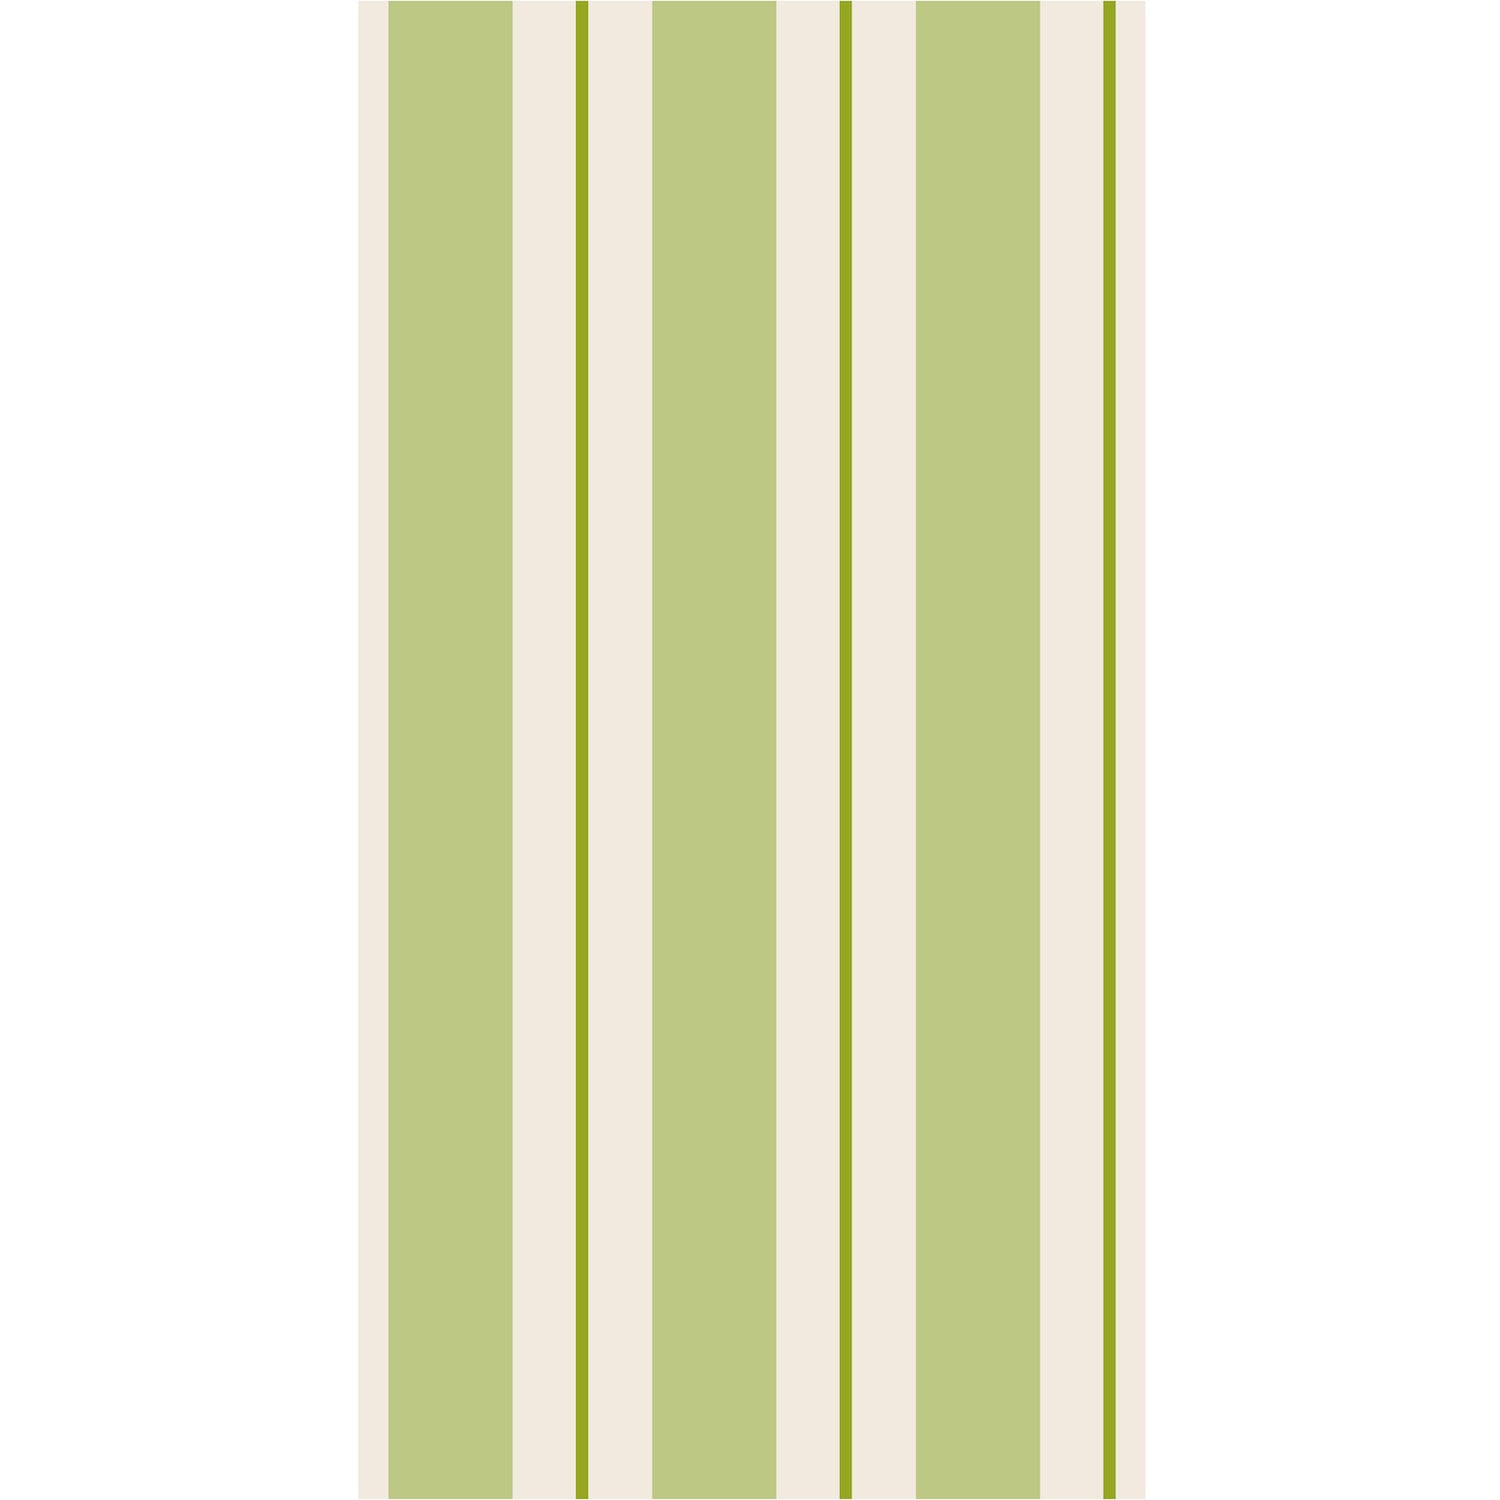 A rectangle guest napkin featuring vertical light green and white stripes, with a bright green line centered in each white stripe.